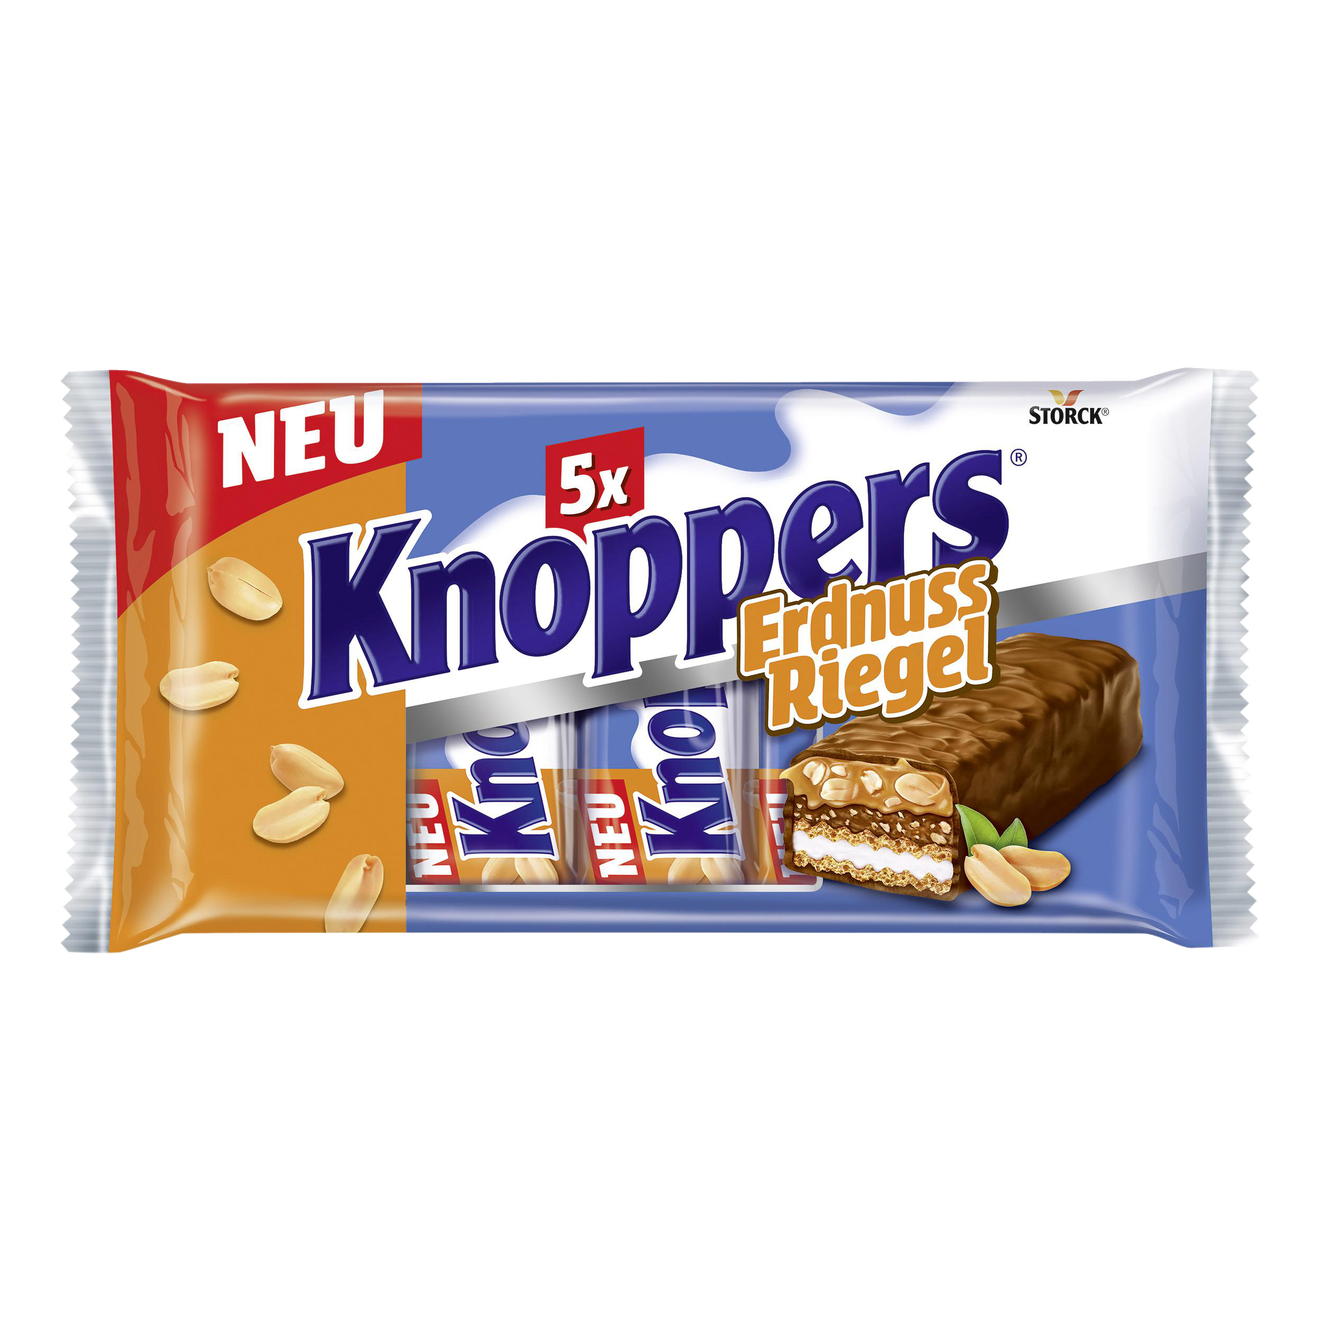 Knoppers. Storck knoppers. Knoppers батончики. Knoppers вафли. Knoppers шоколадки.